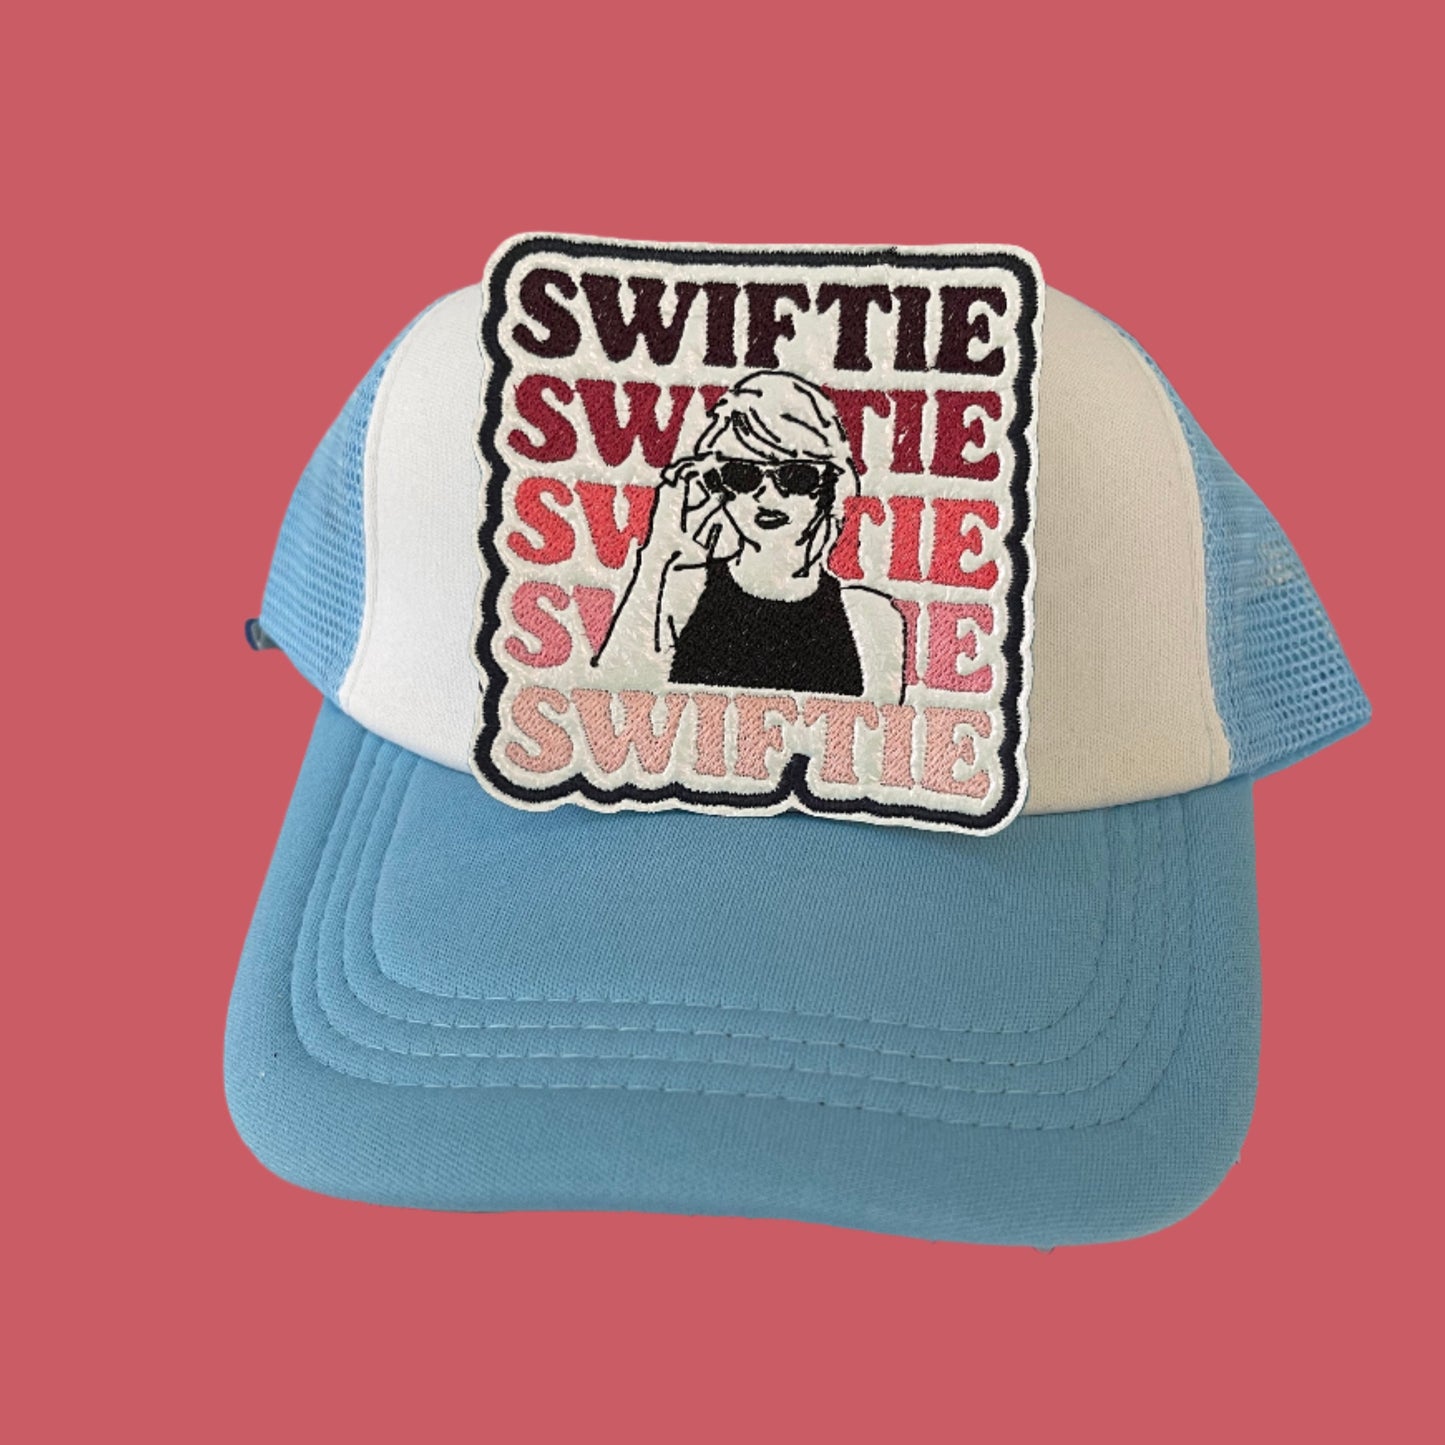 Iron-on patch featuring the word "SWIFTIE" repeated in red and pink gradient shades with a black and white illustration of a woman with sunglasses, outlined in black.